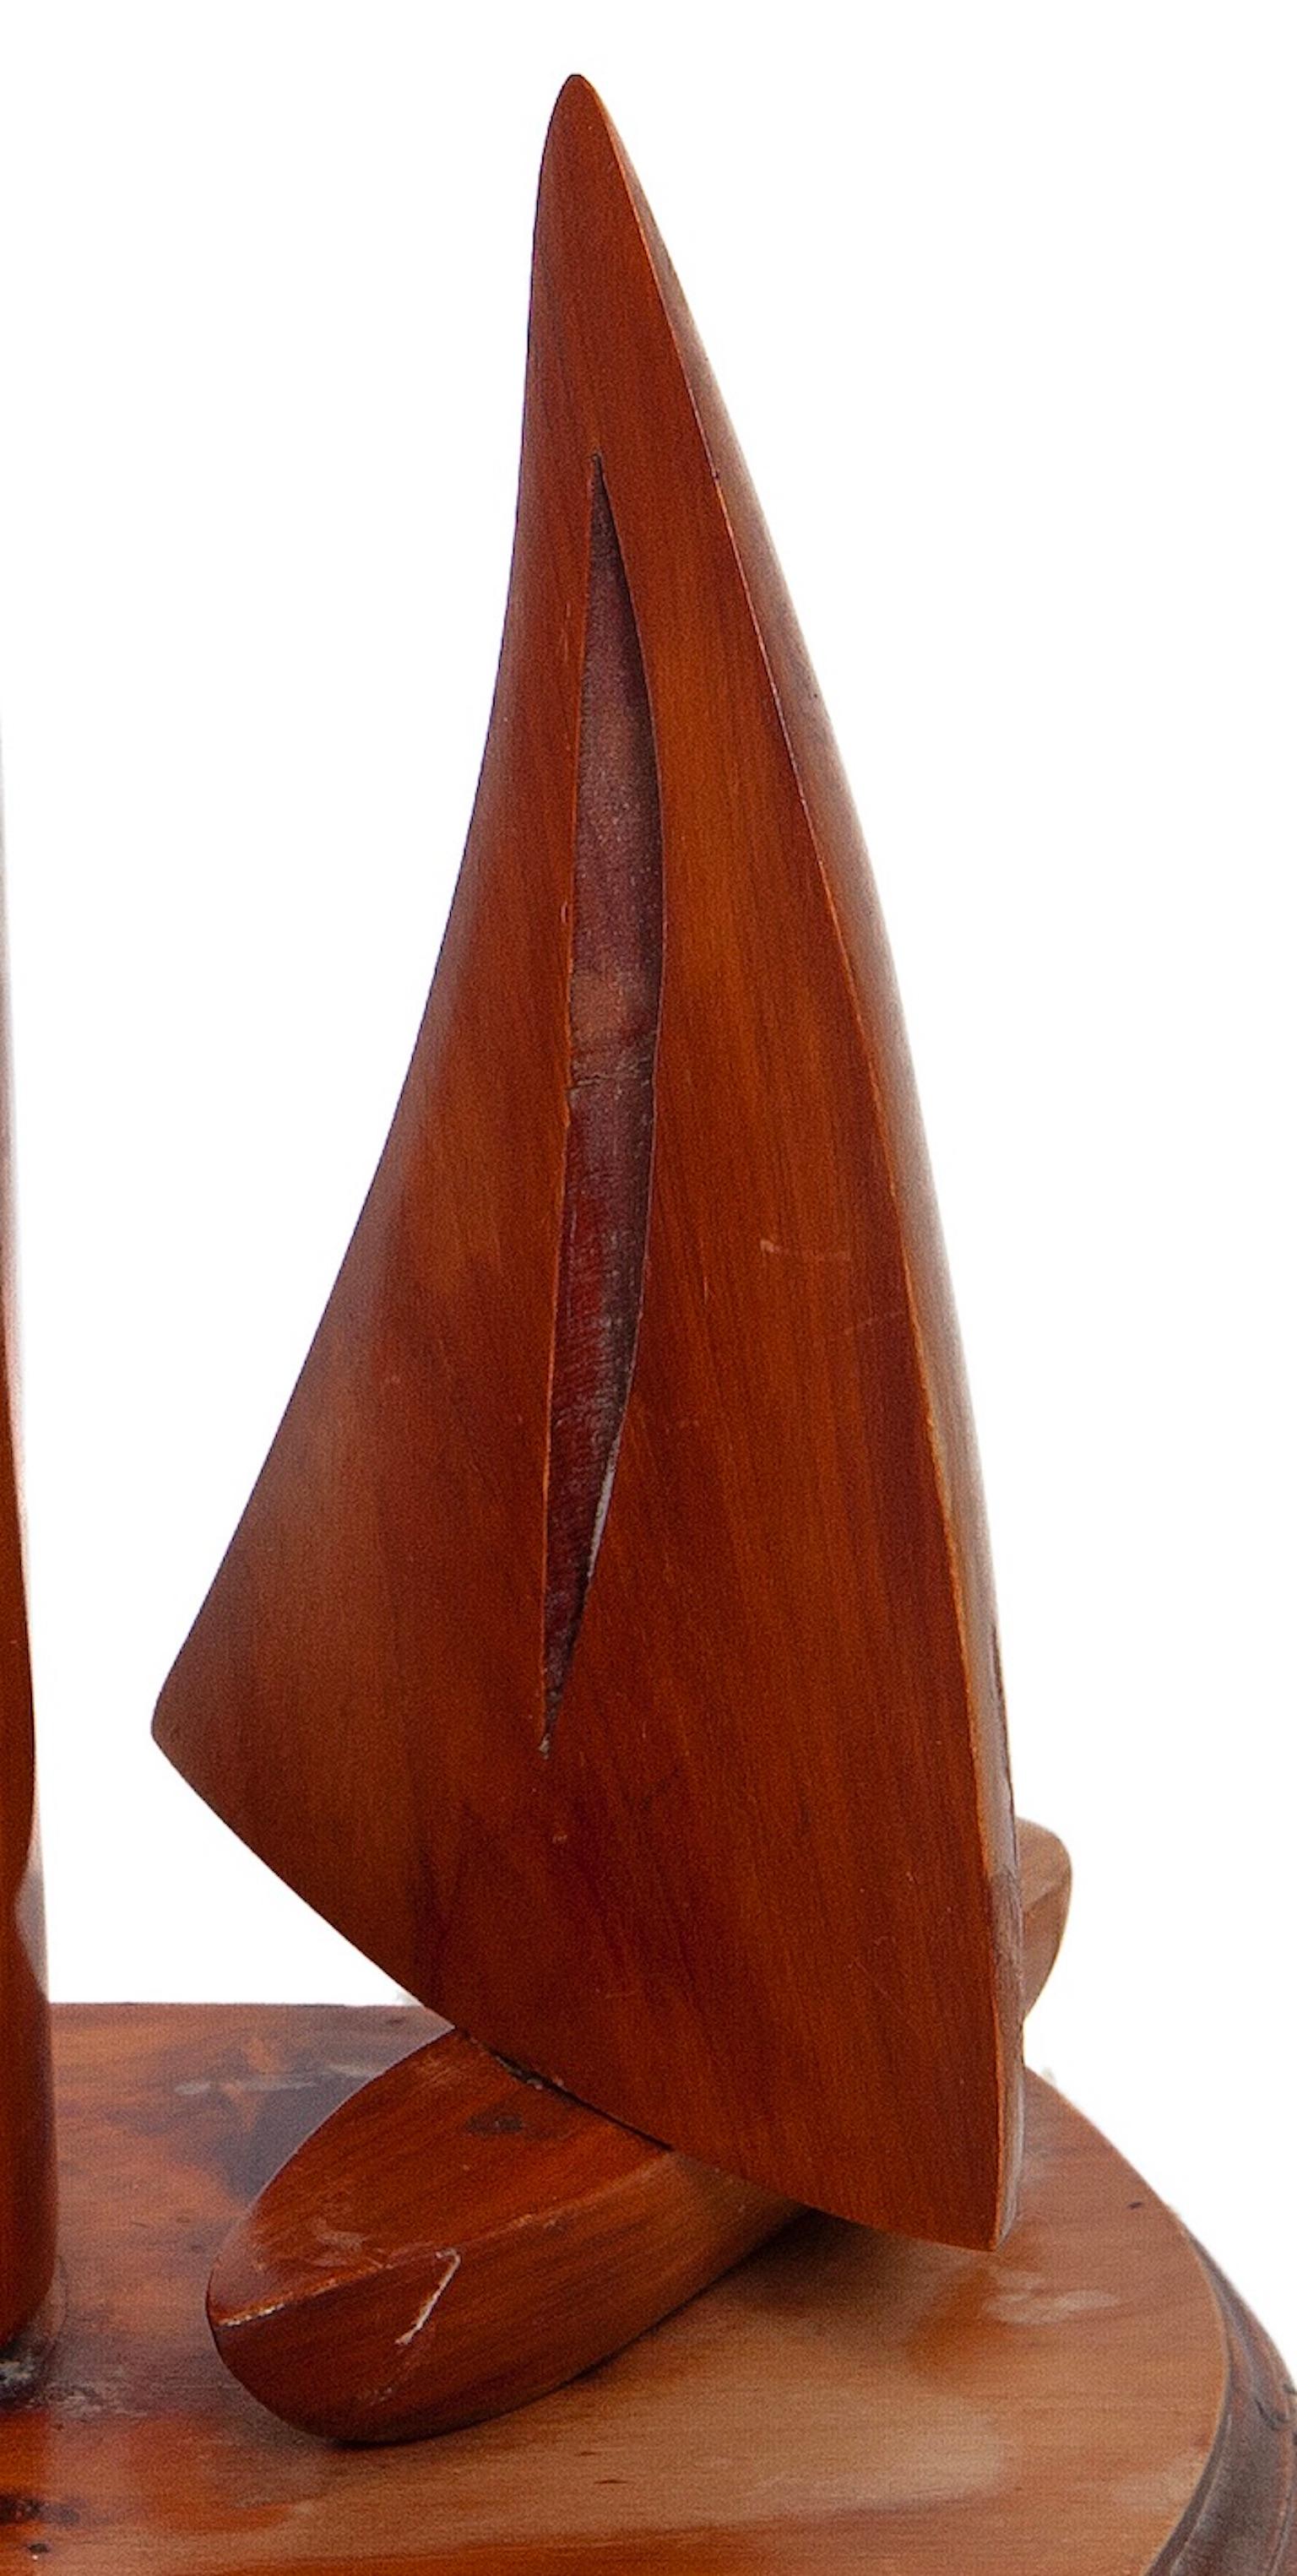 Hand-Carved lamp table yewwood racing yachts pair 13